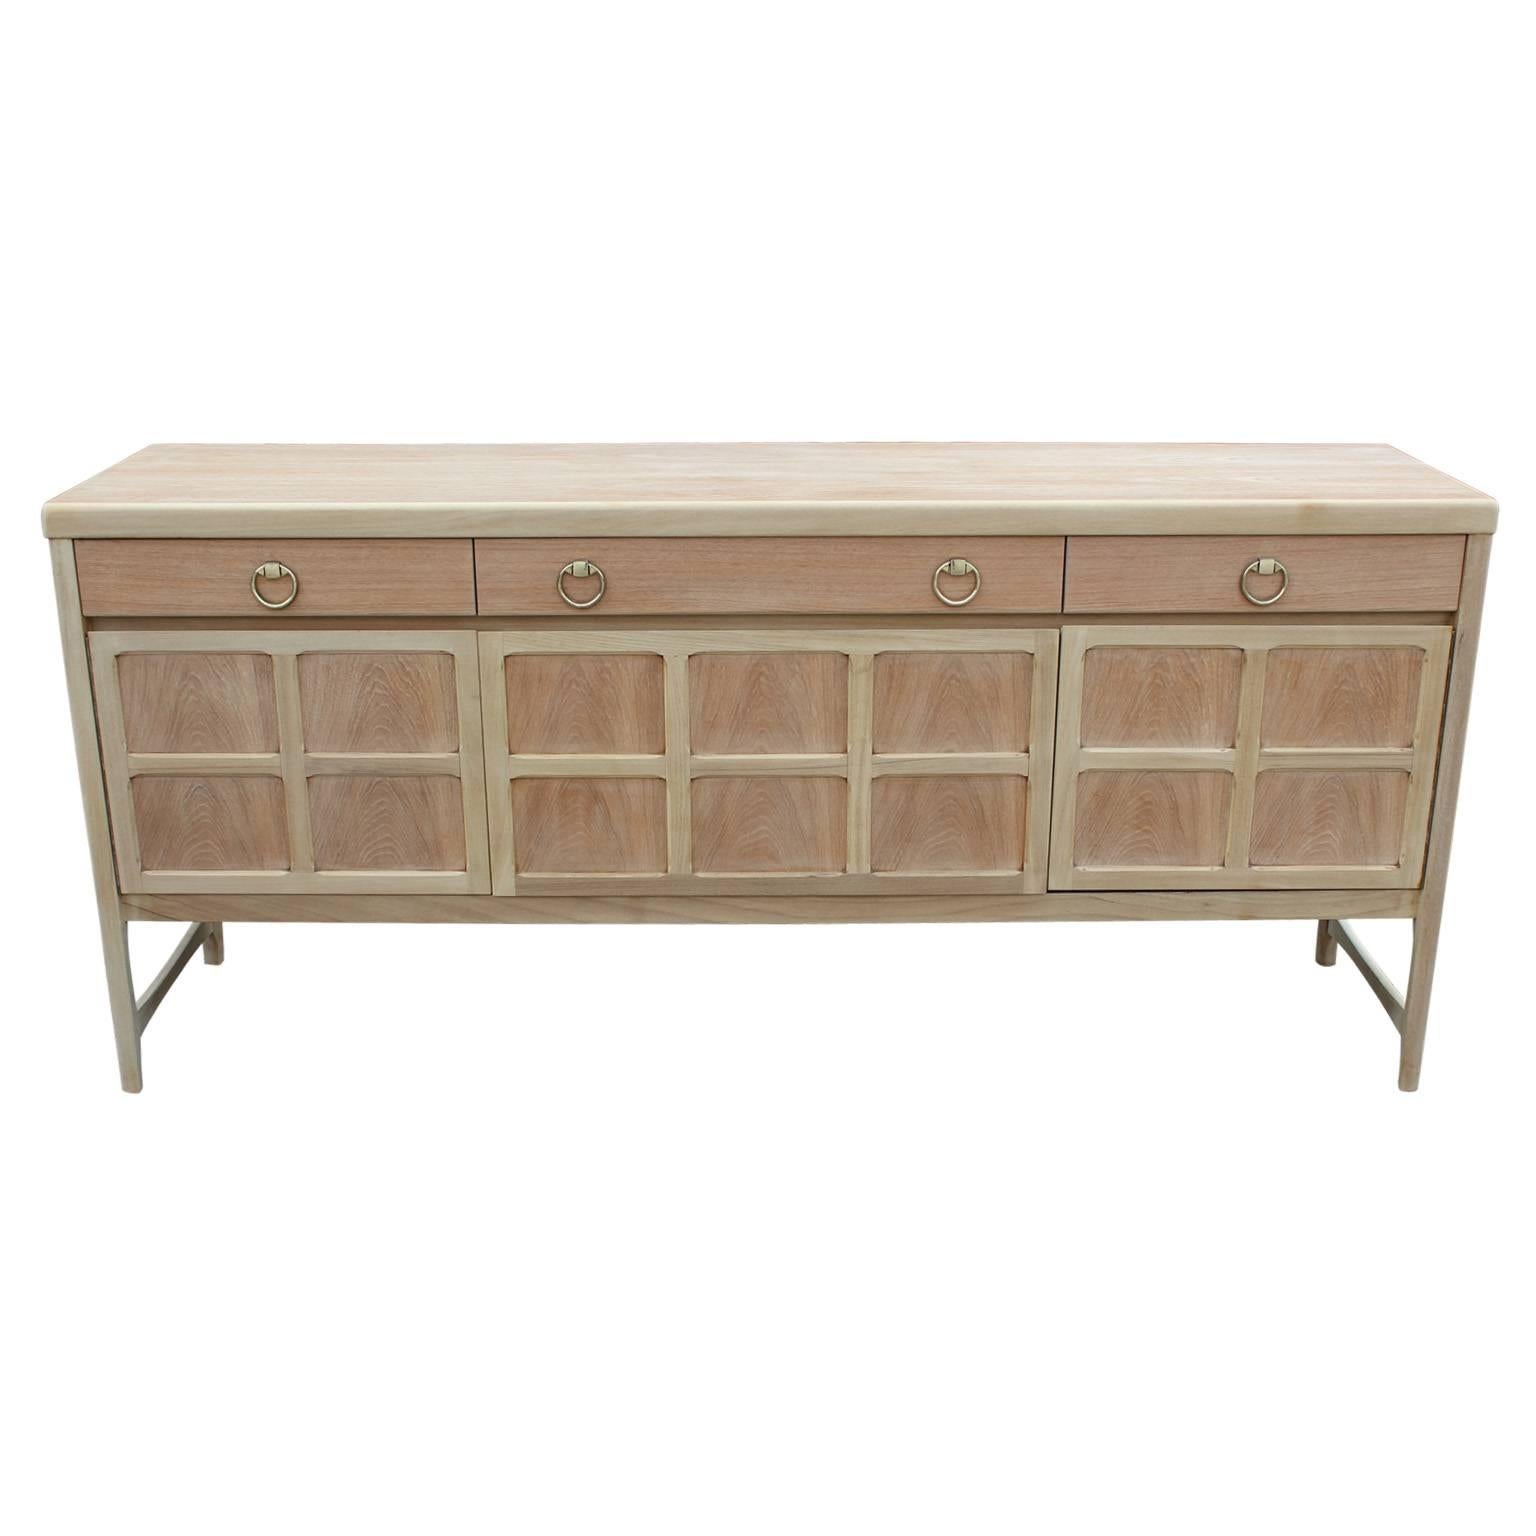 Freshly bleached sophisticated sideboard with brass ring handles. Center cabinet drops down. Three drawers provide additional storage.